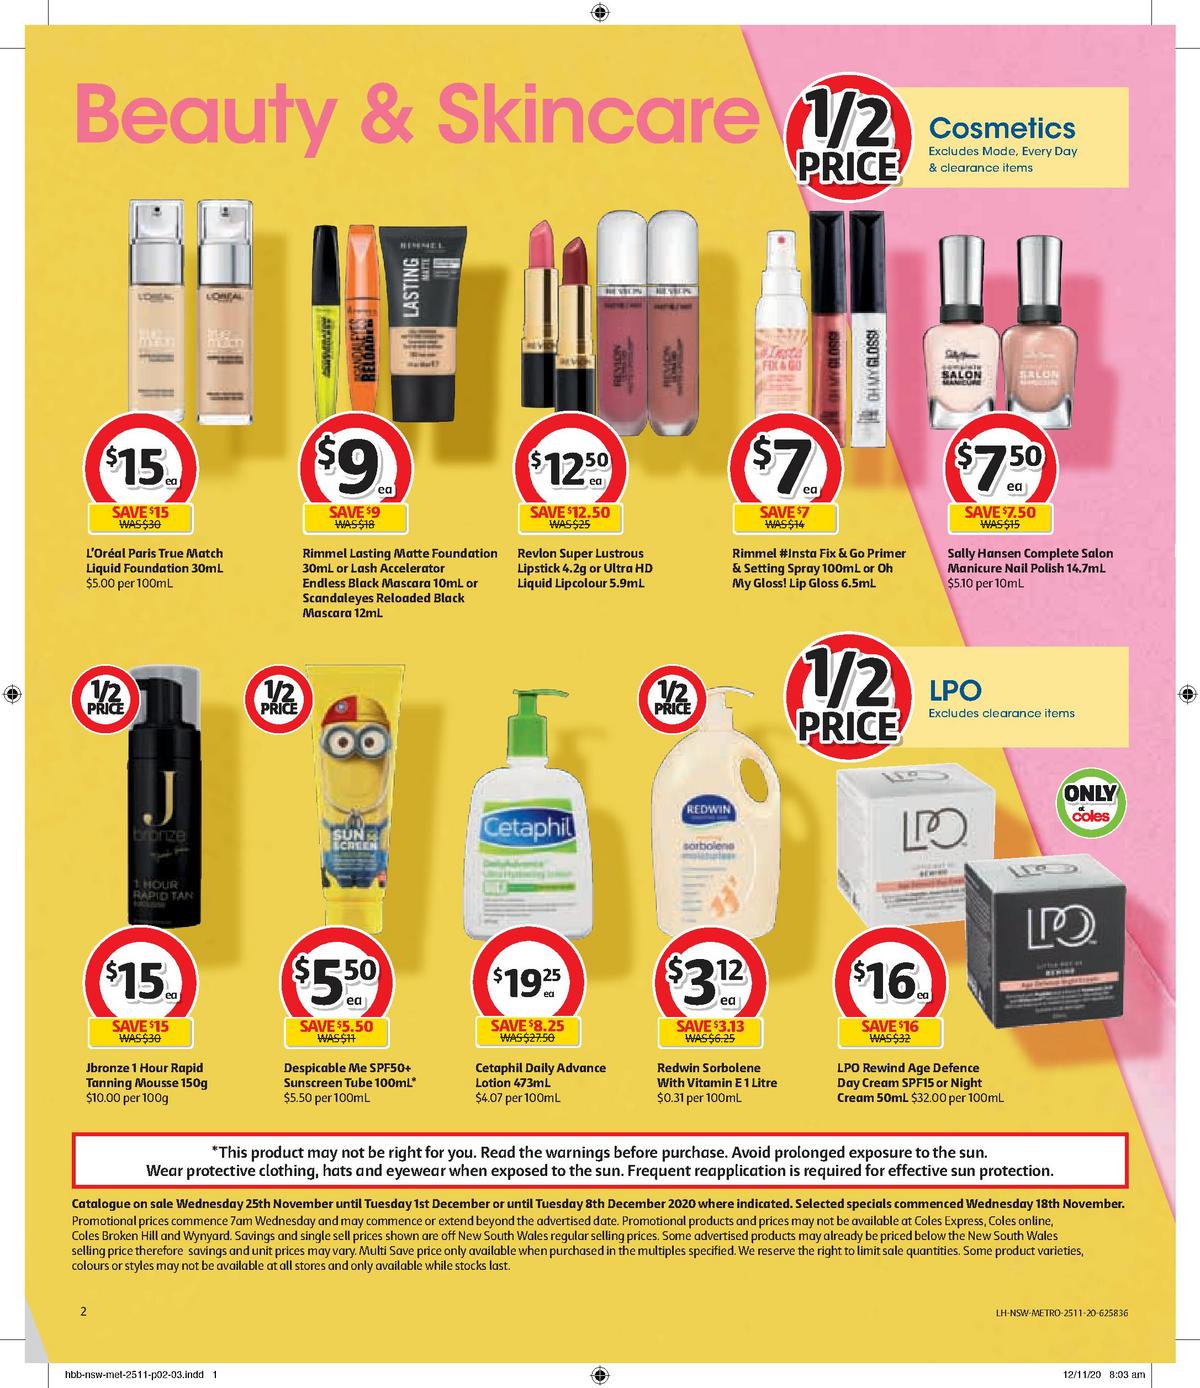 Coles Health & Beauty Catalogues from 25 November